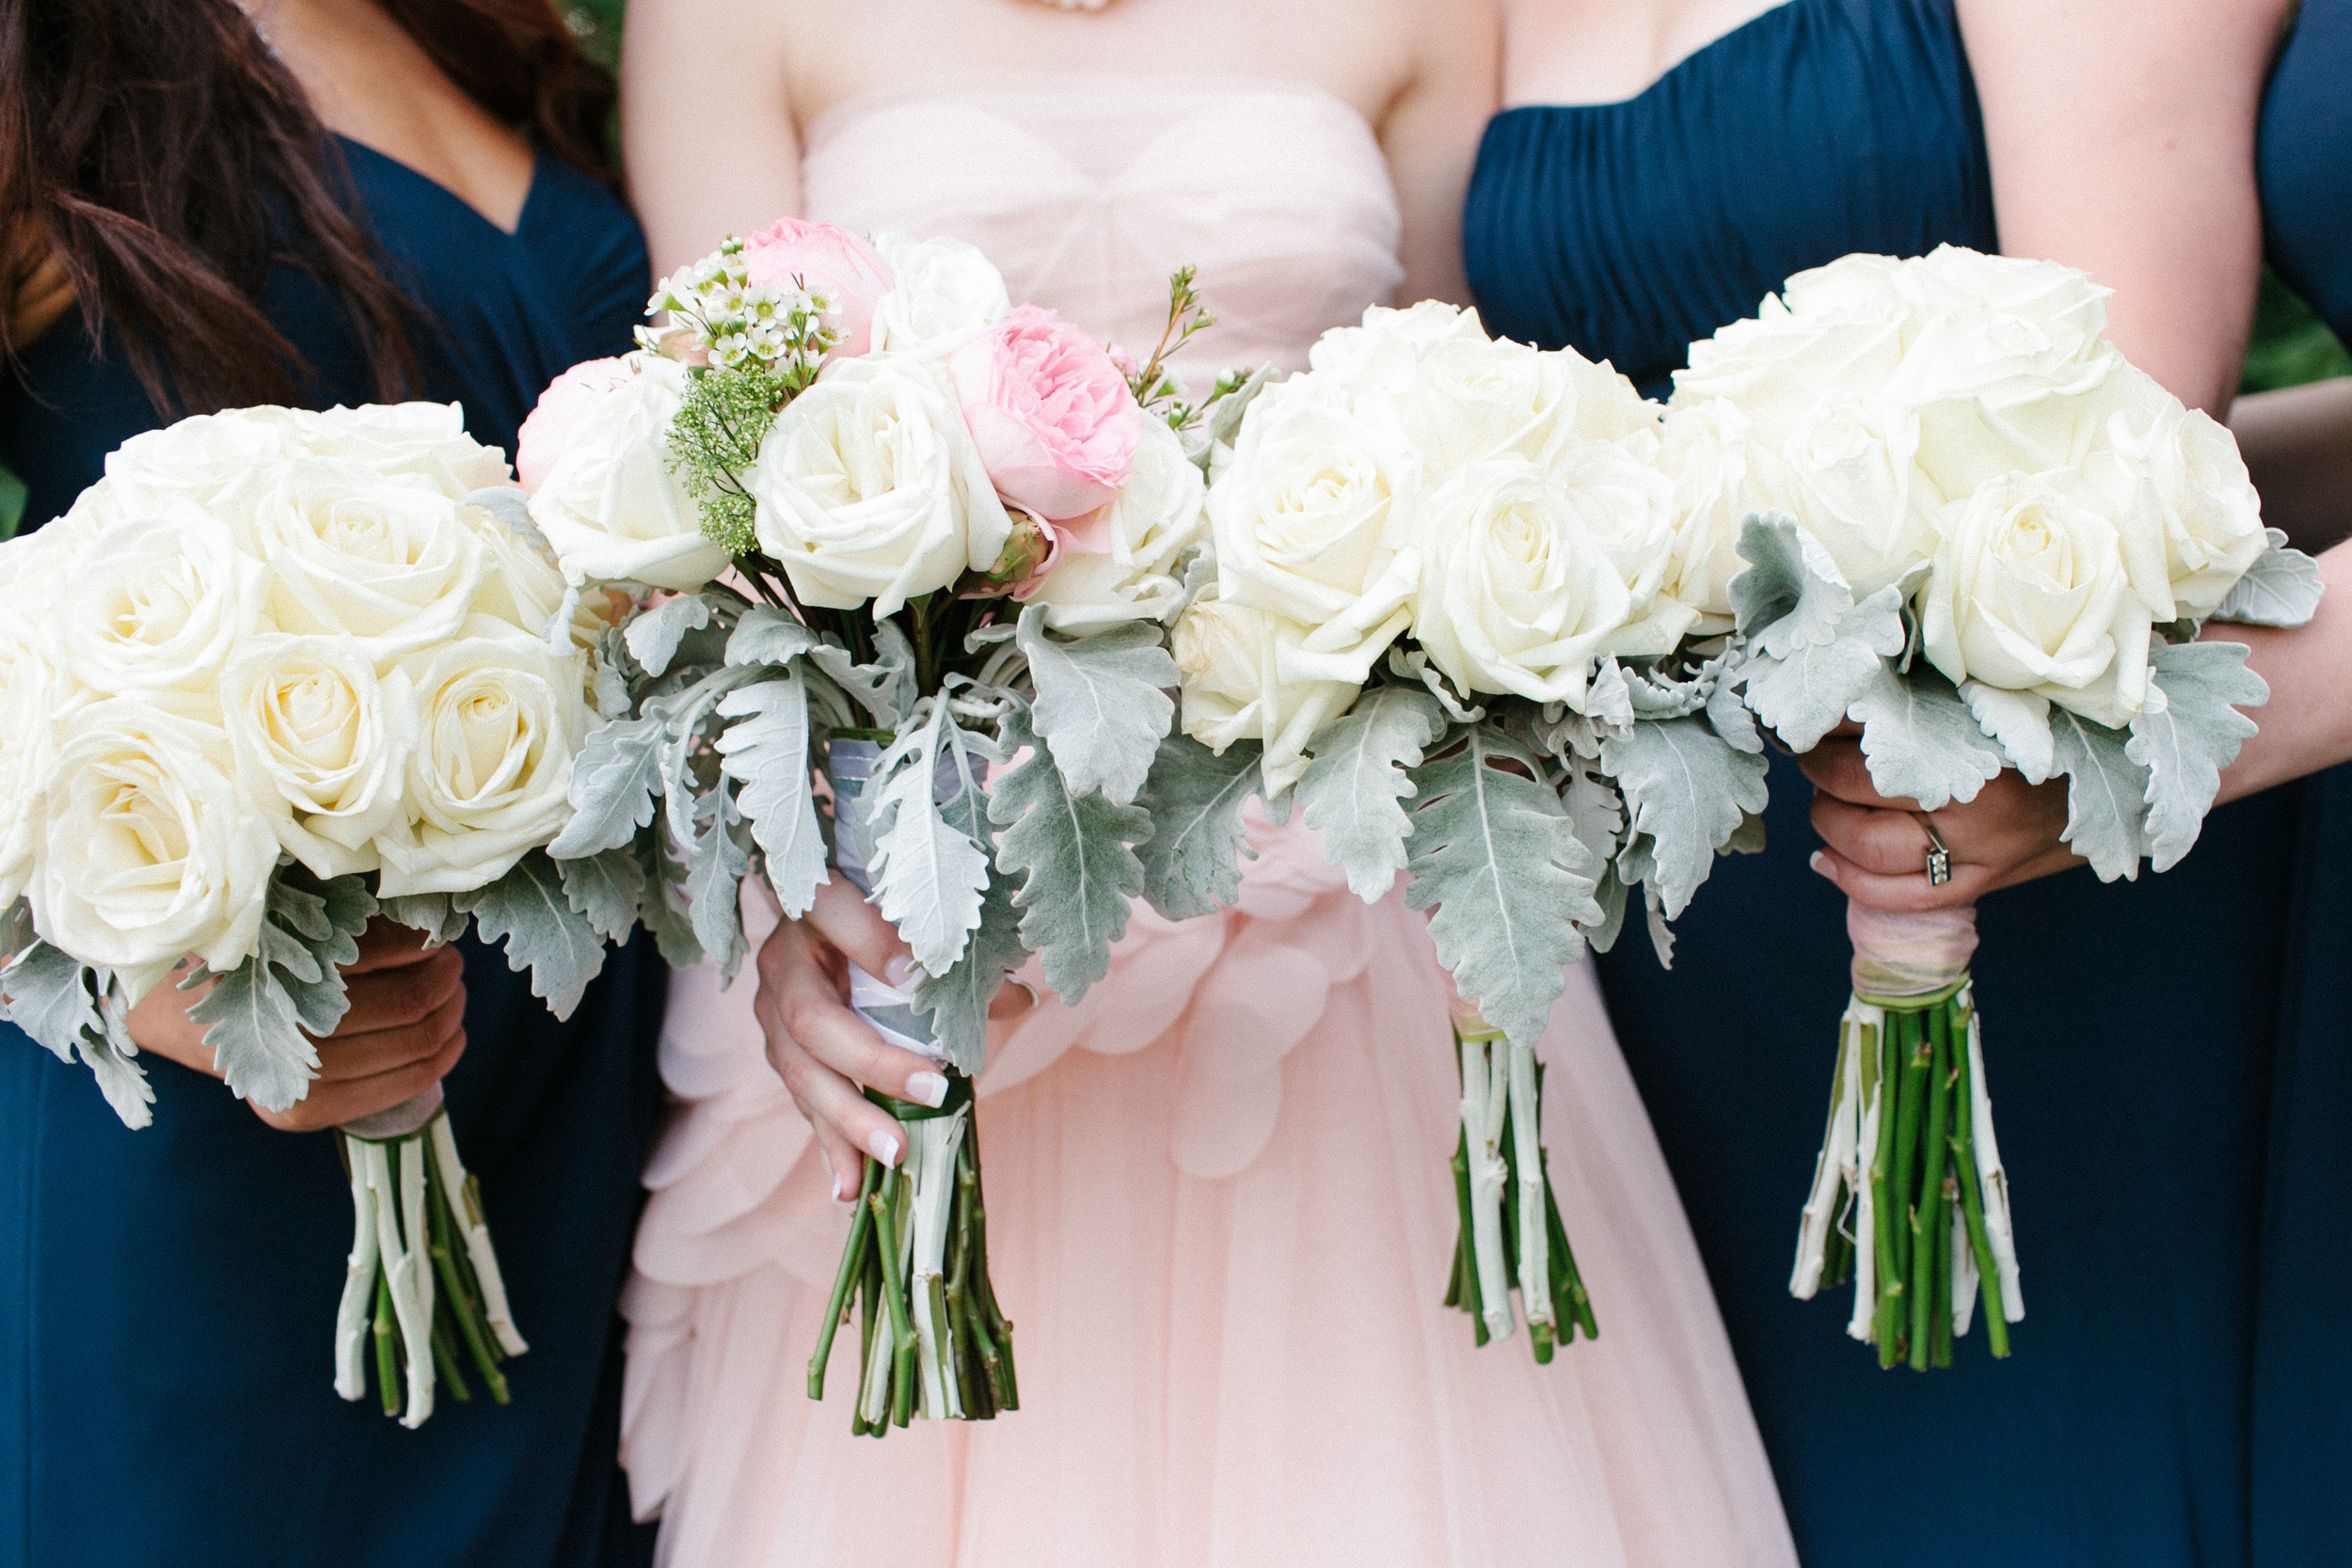  Pretty Bridesmaids and Bridal Bouquet | Pink and Navy Blue | photo by blf Studios | flowers by Norwood Florist | wedding by Madeline's Weddings 